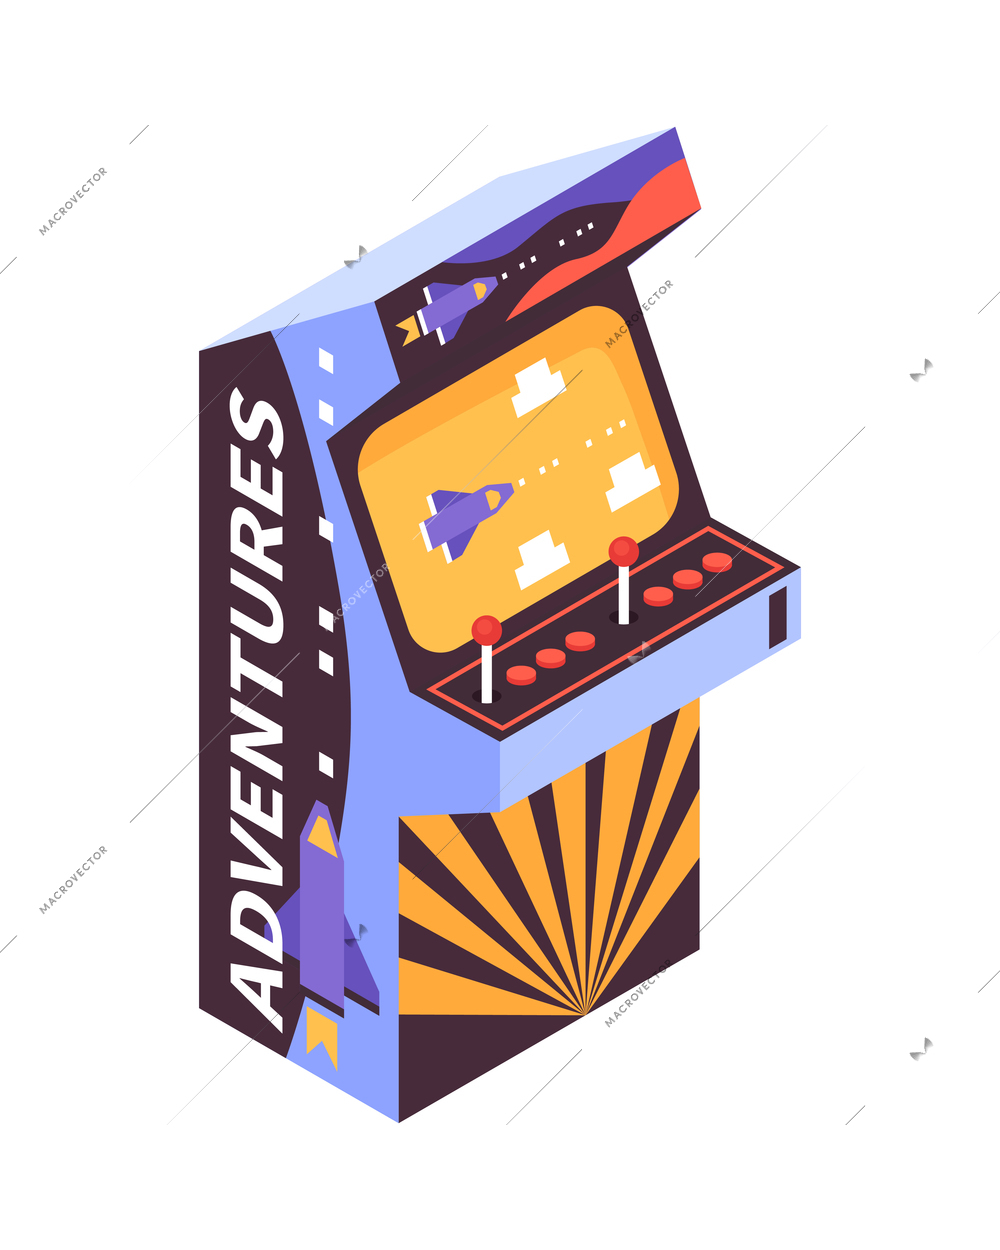 Isometric icon with adventure shooting game on screen of retro arcade machine vector illustration